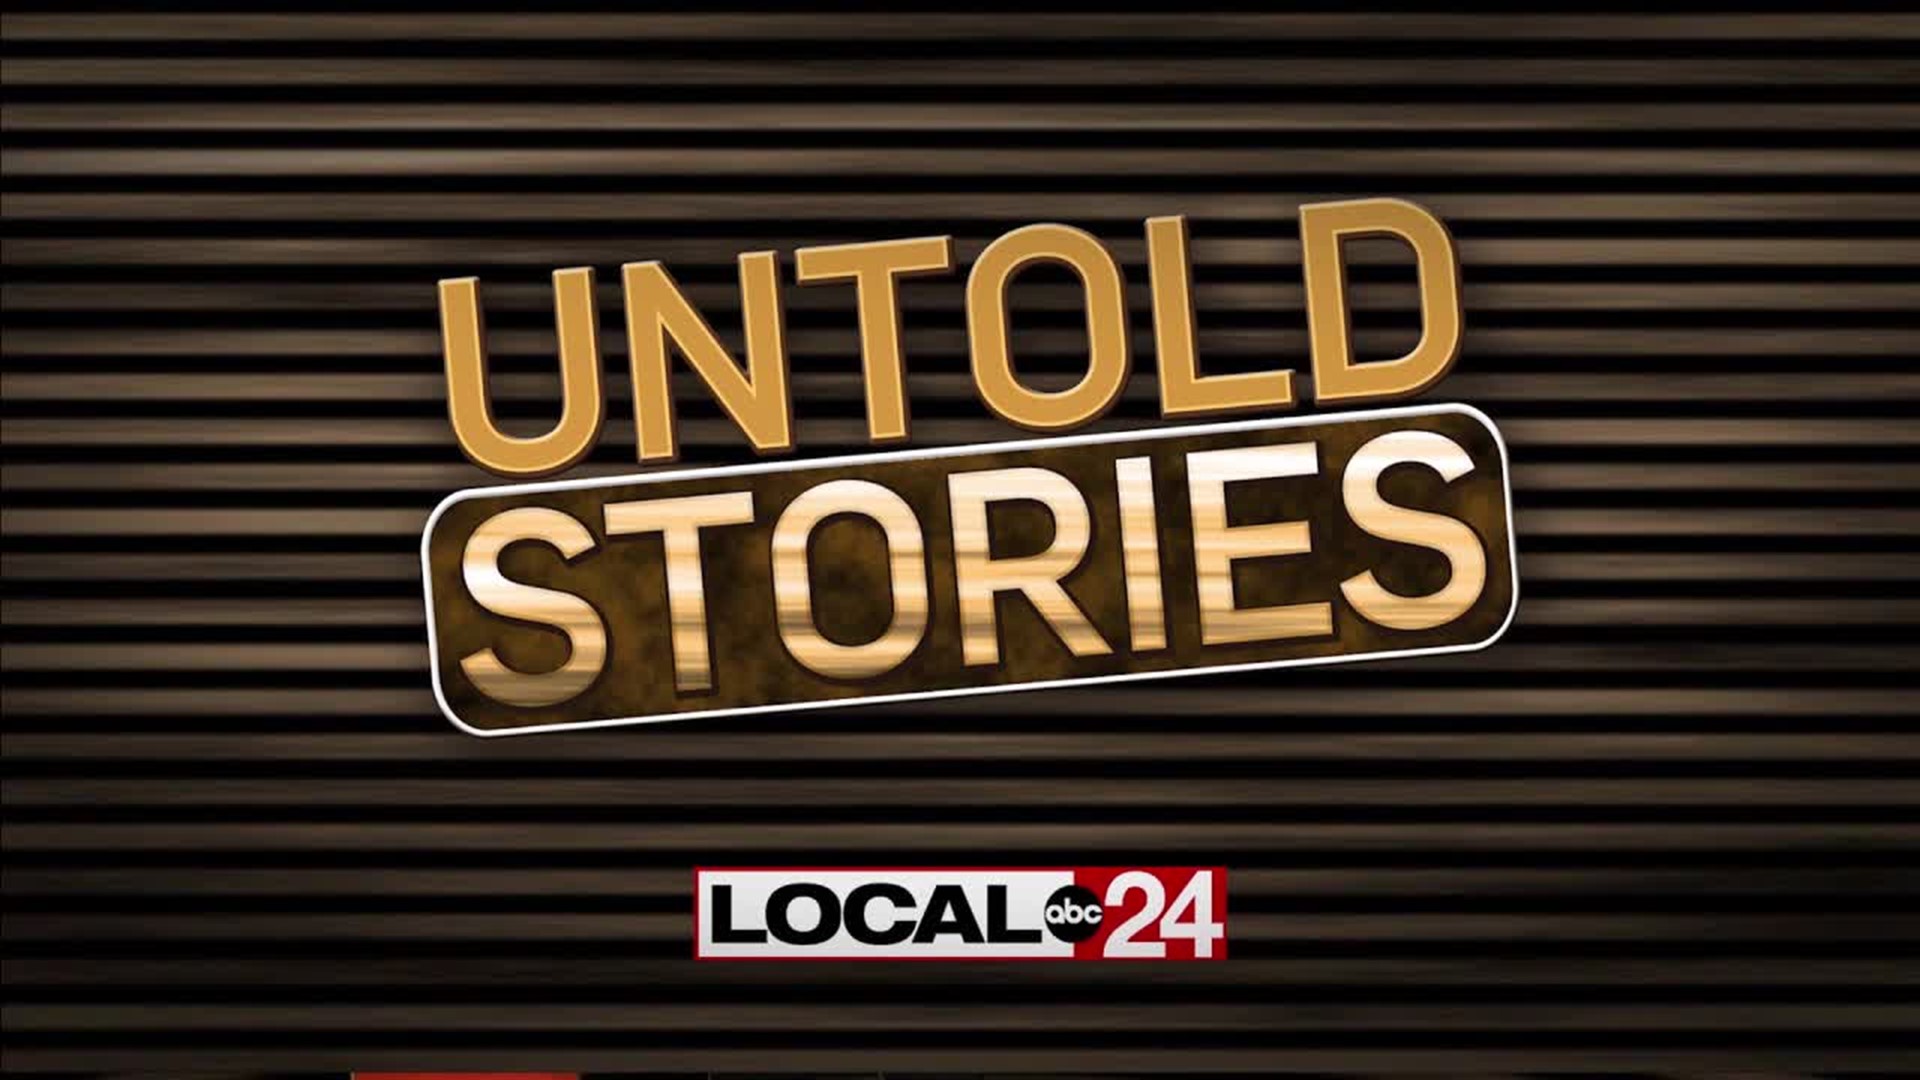 “Untold Stories”: A Local 24 News special presentation for Black History Month